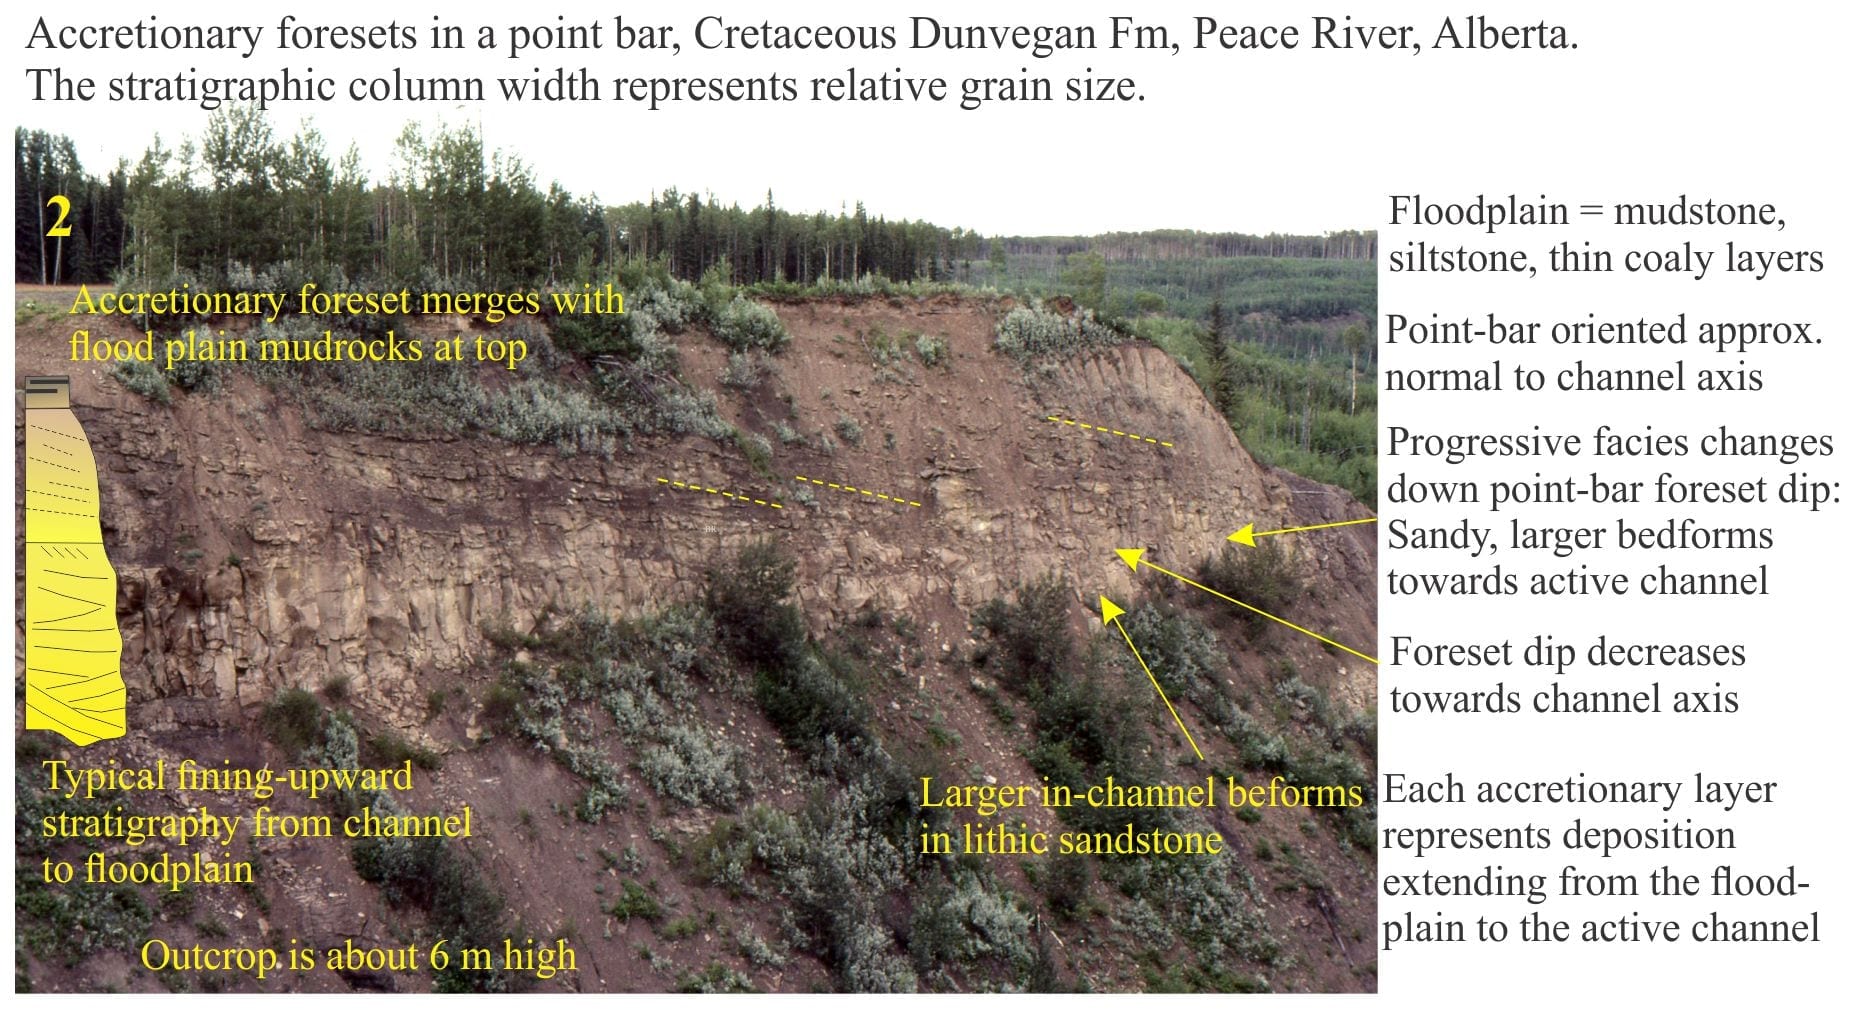 point bar accretionary foresets Archives - Geological Digressions